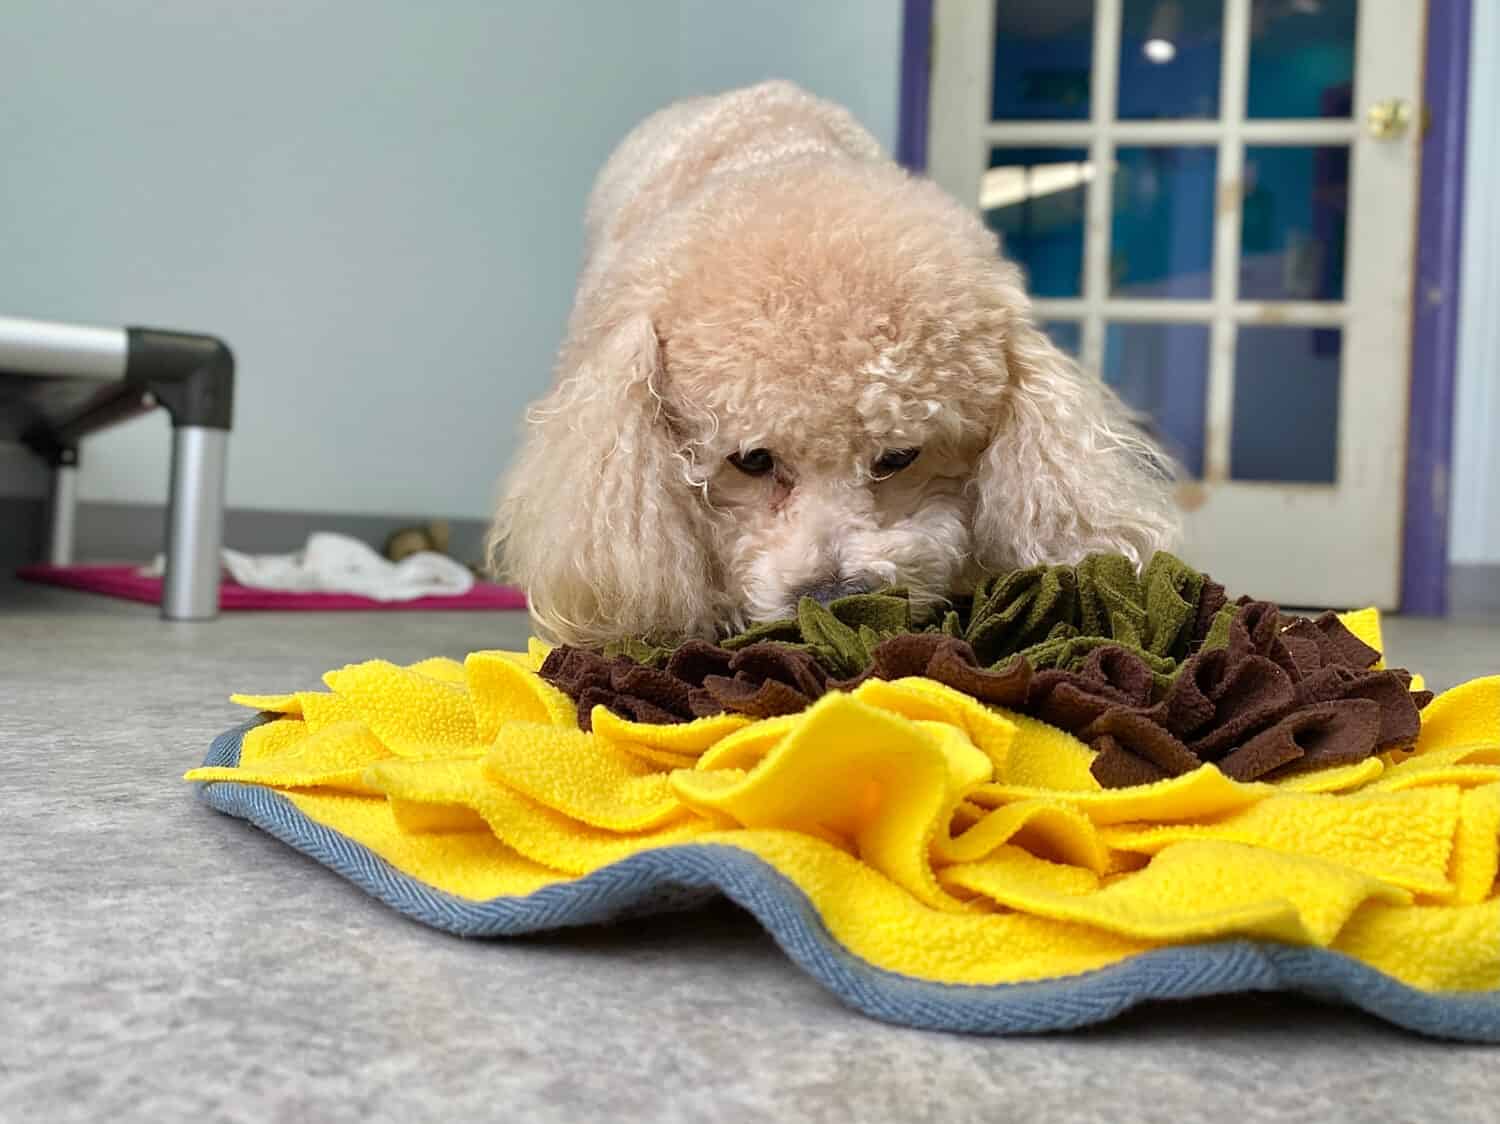 Tiny cream colored purebred miniature poodle searching for food in the snuffle mat in her pet boarding suite at the positive reinforcement canine enrichment training center